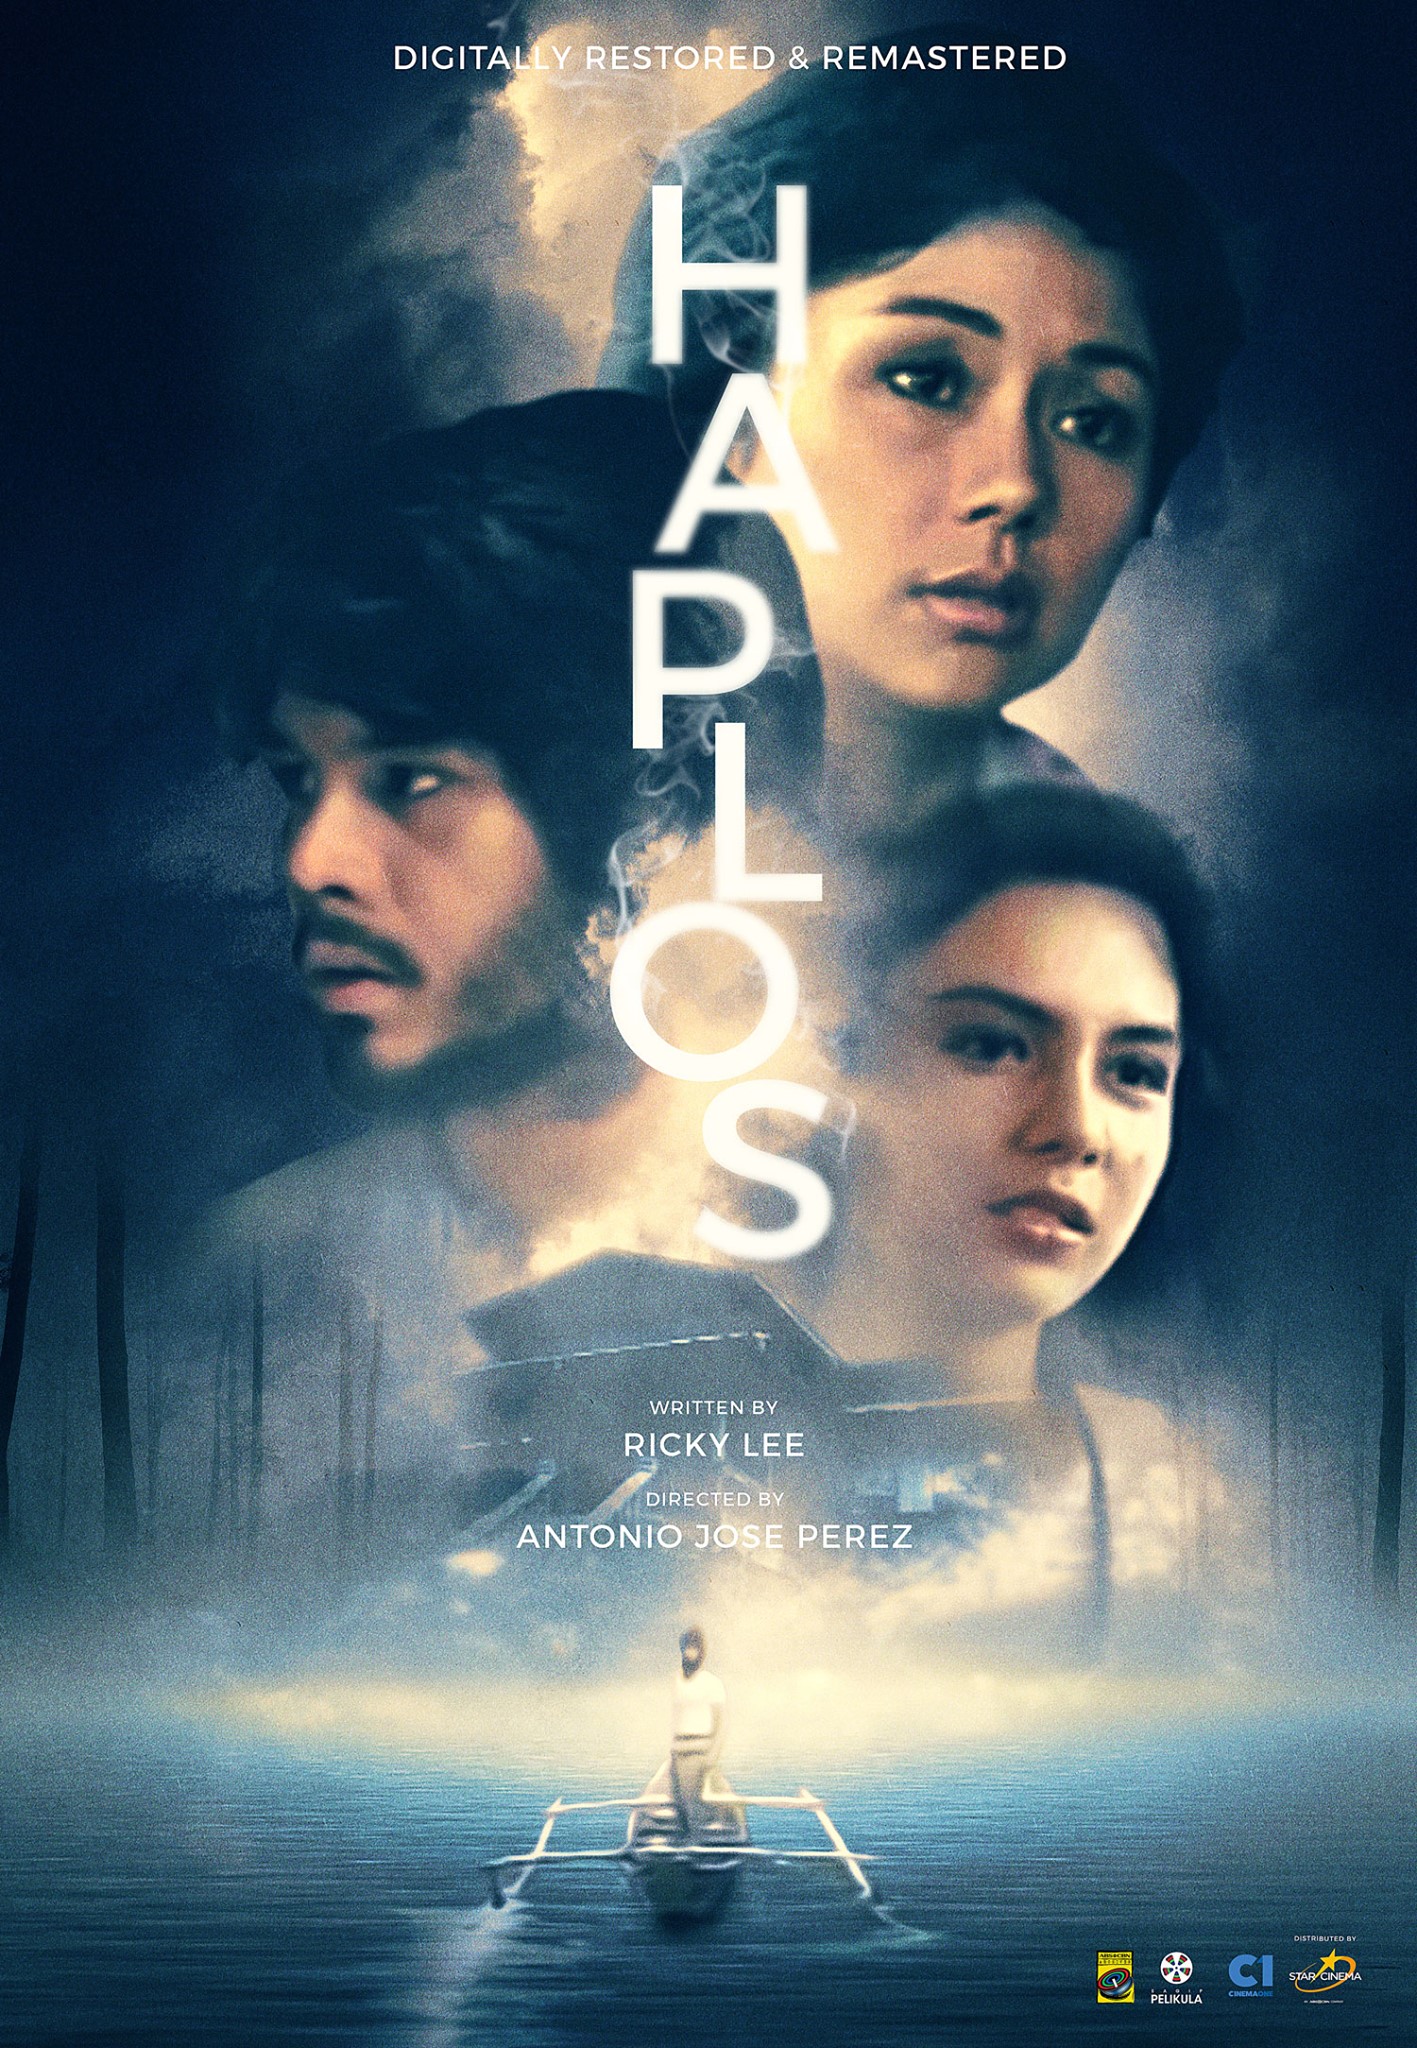 Abs-Cbn Film Restoration Page Liked · November 23 · Edited · Watch the restored HAPLOS and TATLONG TAONG WALANG DIYOS at UP Diliman, Cine Adarna! Nov 23 Haplos | 5PM Tatlong Taong Walang Diyos | 7:30PM Dec 2 Tatlong Taong Walang Diyos | 5PM Haplos | 7:30PM #SagipPelikula #TatlongTaongWalangDiyos #Haplos #ABSCBNFilmRestoration — with Noy Lauzon and Cine Adarna.